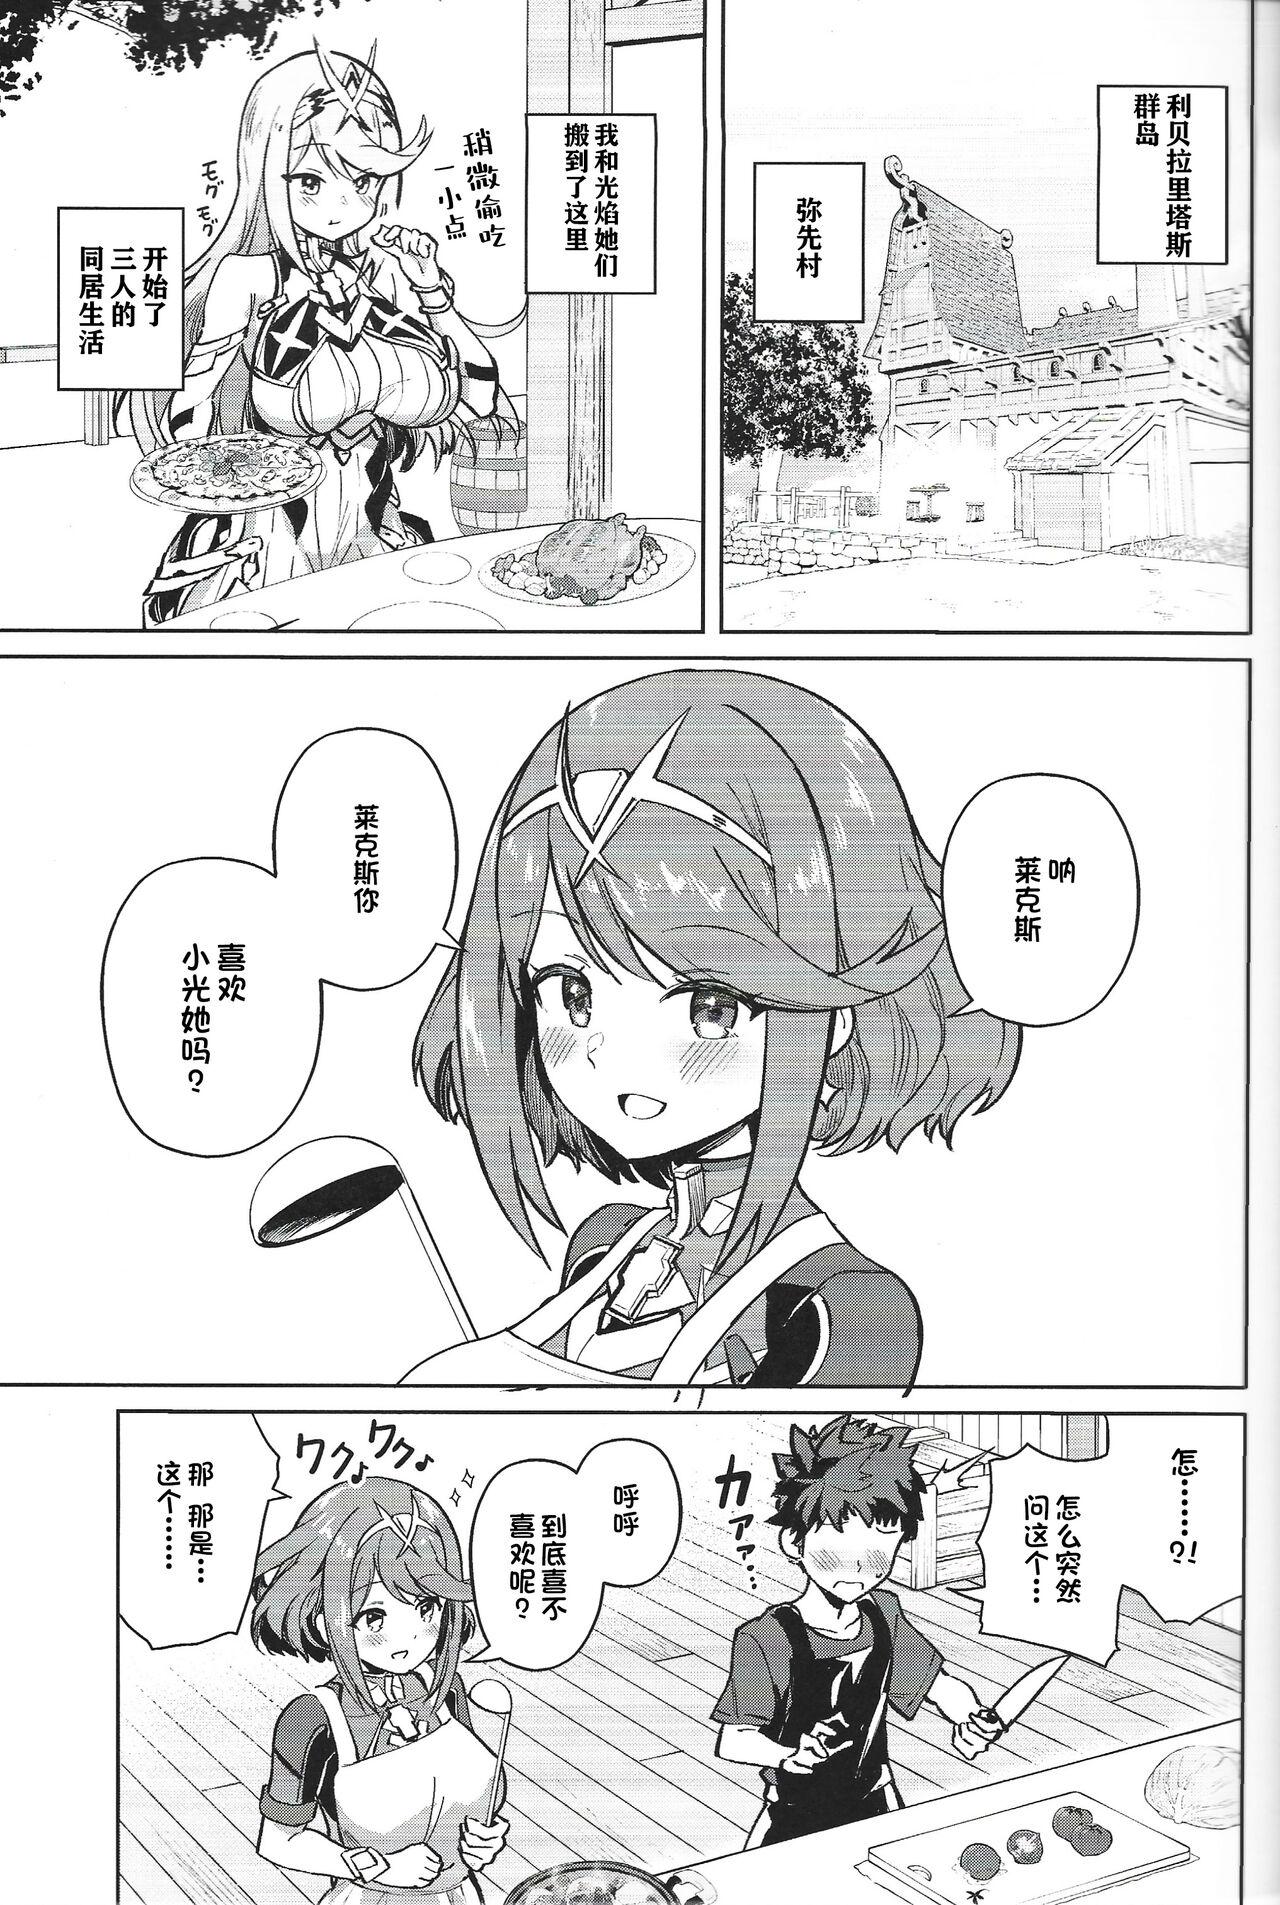 Free Amatuer えっちがしたいヒカリとホムラ - Xenoblade chronicles 2 Lovers - Page 2